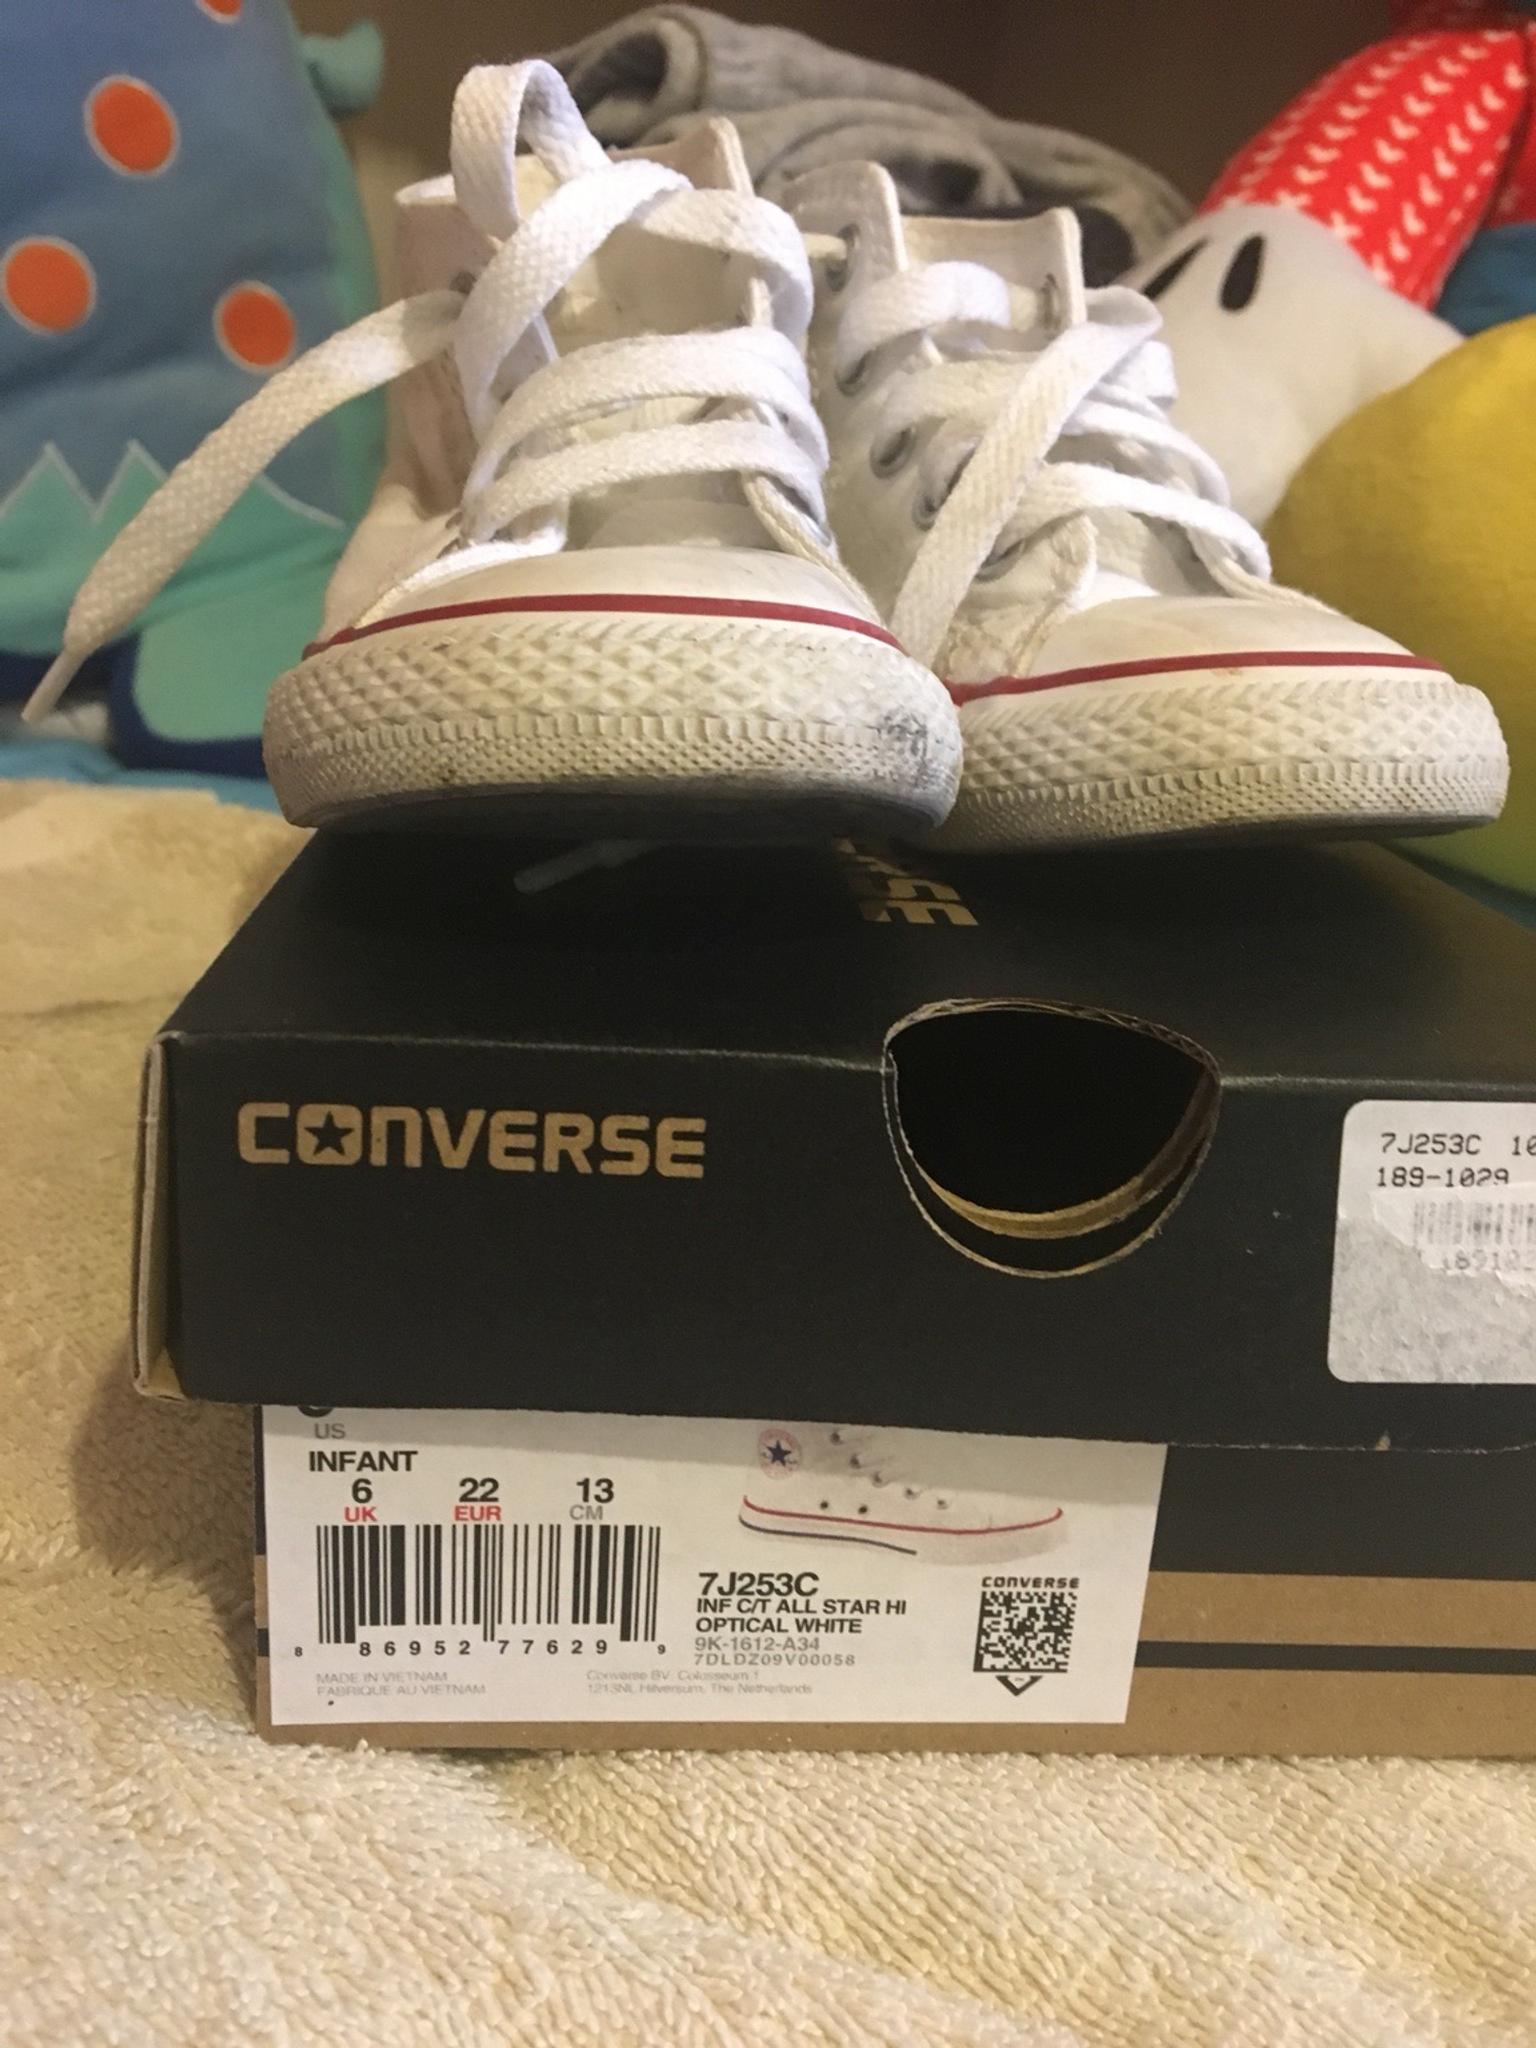 Converse bimbo in 00172 Roma for €25.00 for sale | Shpock